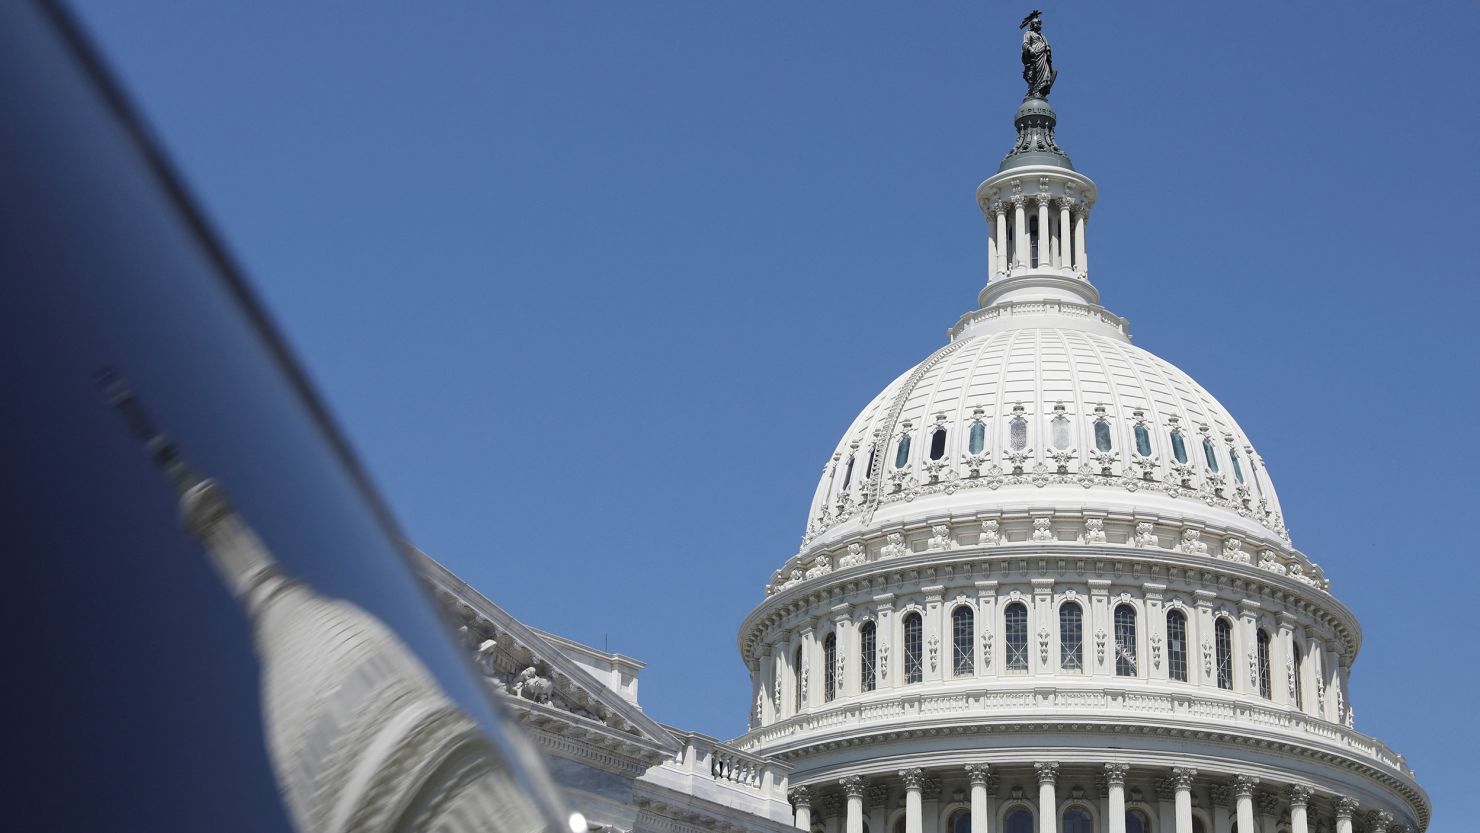 The dome of the US Capitol is reflected in a window on Capitol Hill in Washington on April 20, 2023.